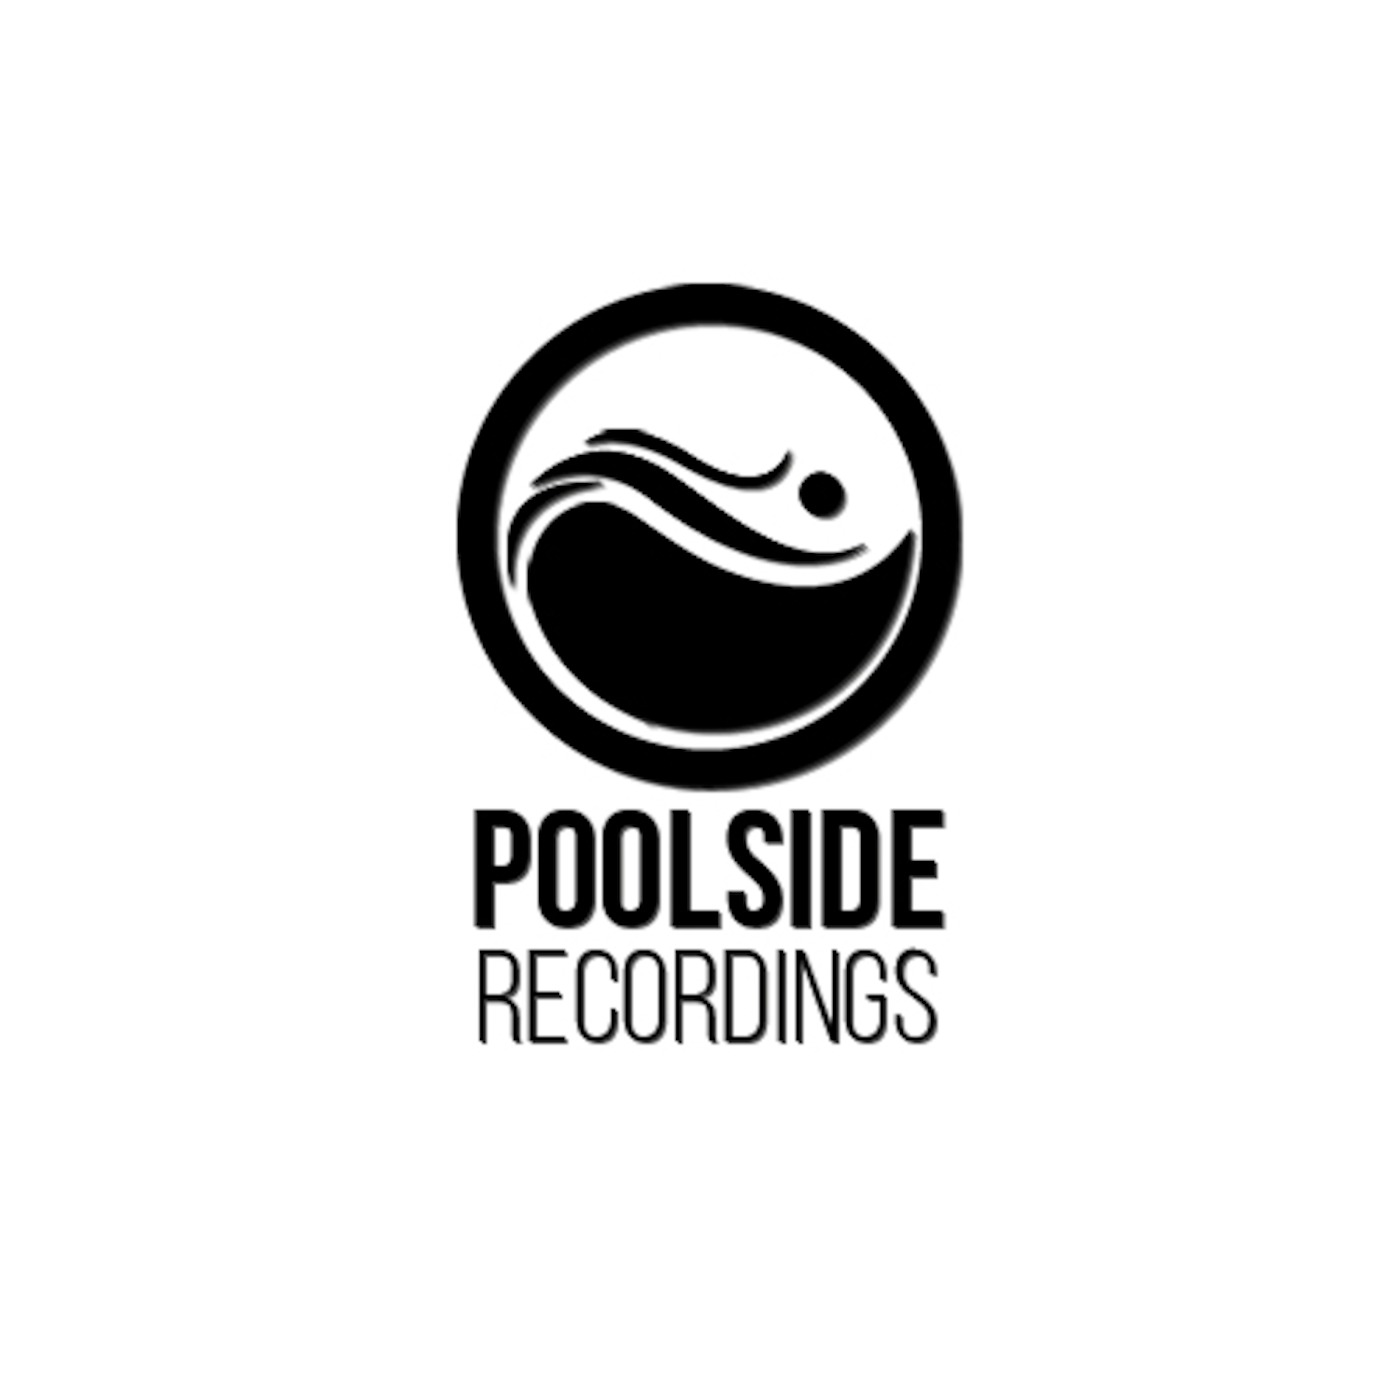 The Poolcast